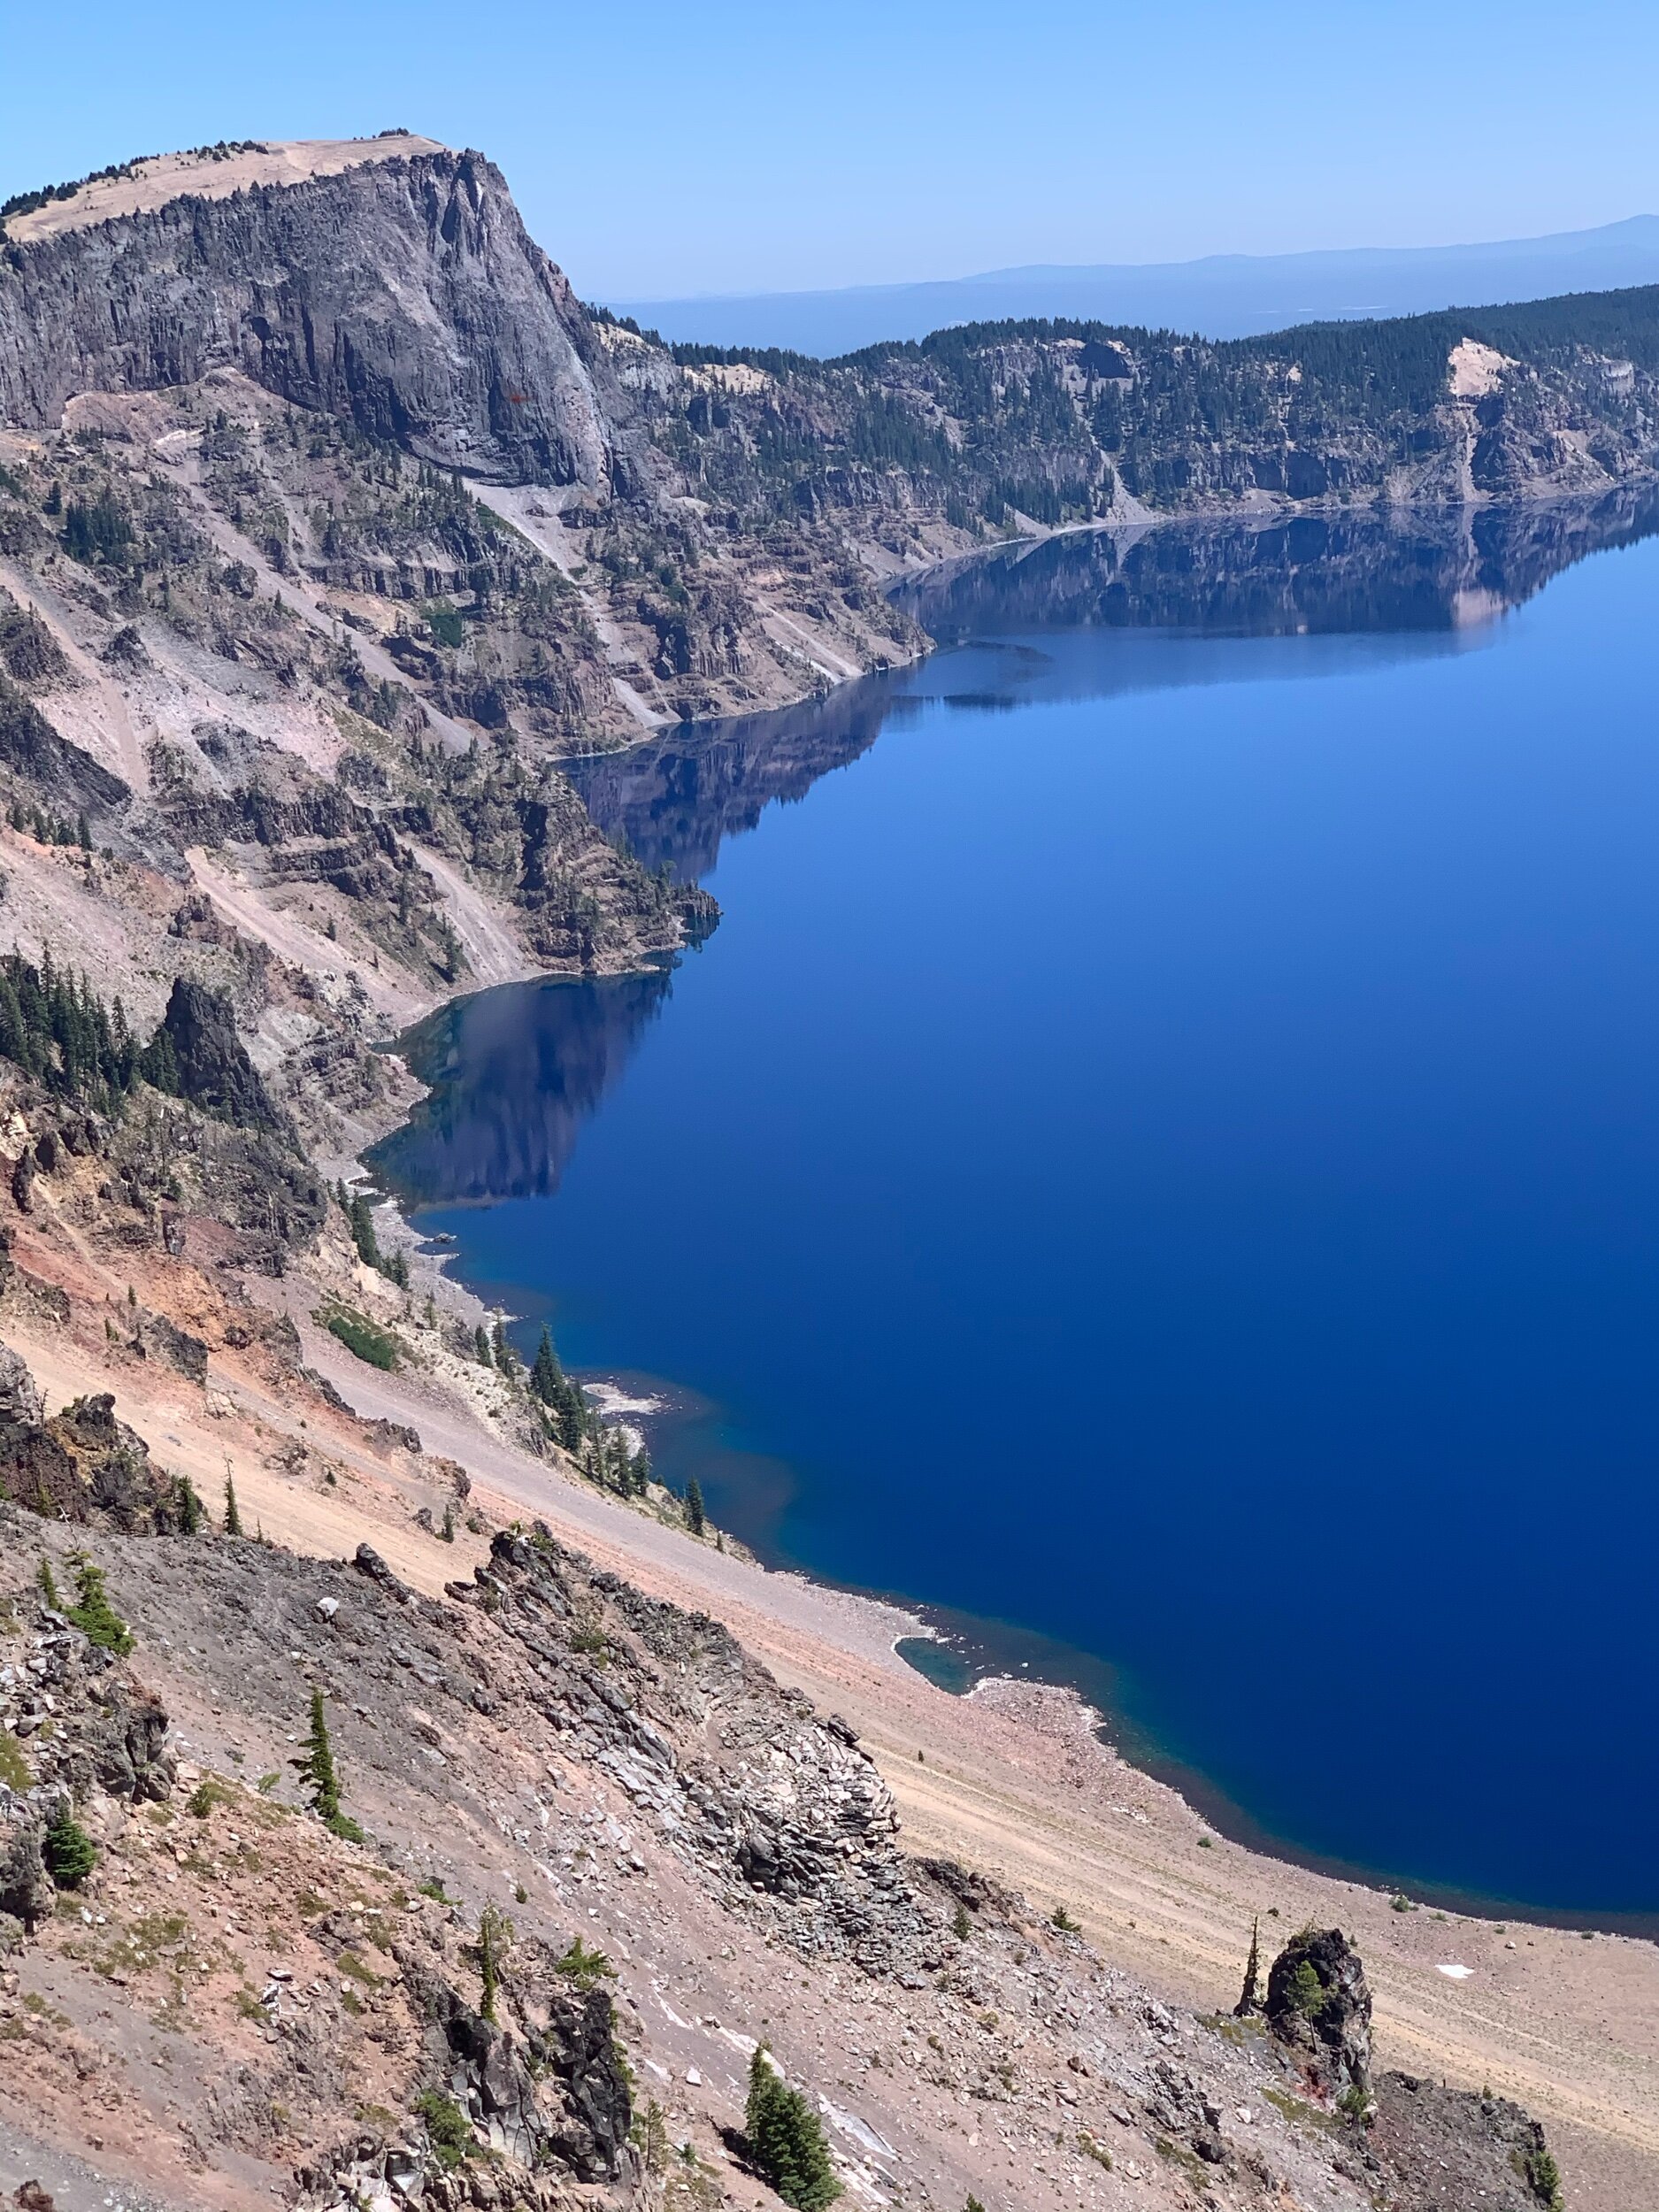  With an annual average of 43 feet of snowfall, Crater Lake is one of the snowiest places in the US. That’s equivalent to almost 1.5” of snow every day of the year!  Crater Lake  was established as a  National Park  in May 1902.     